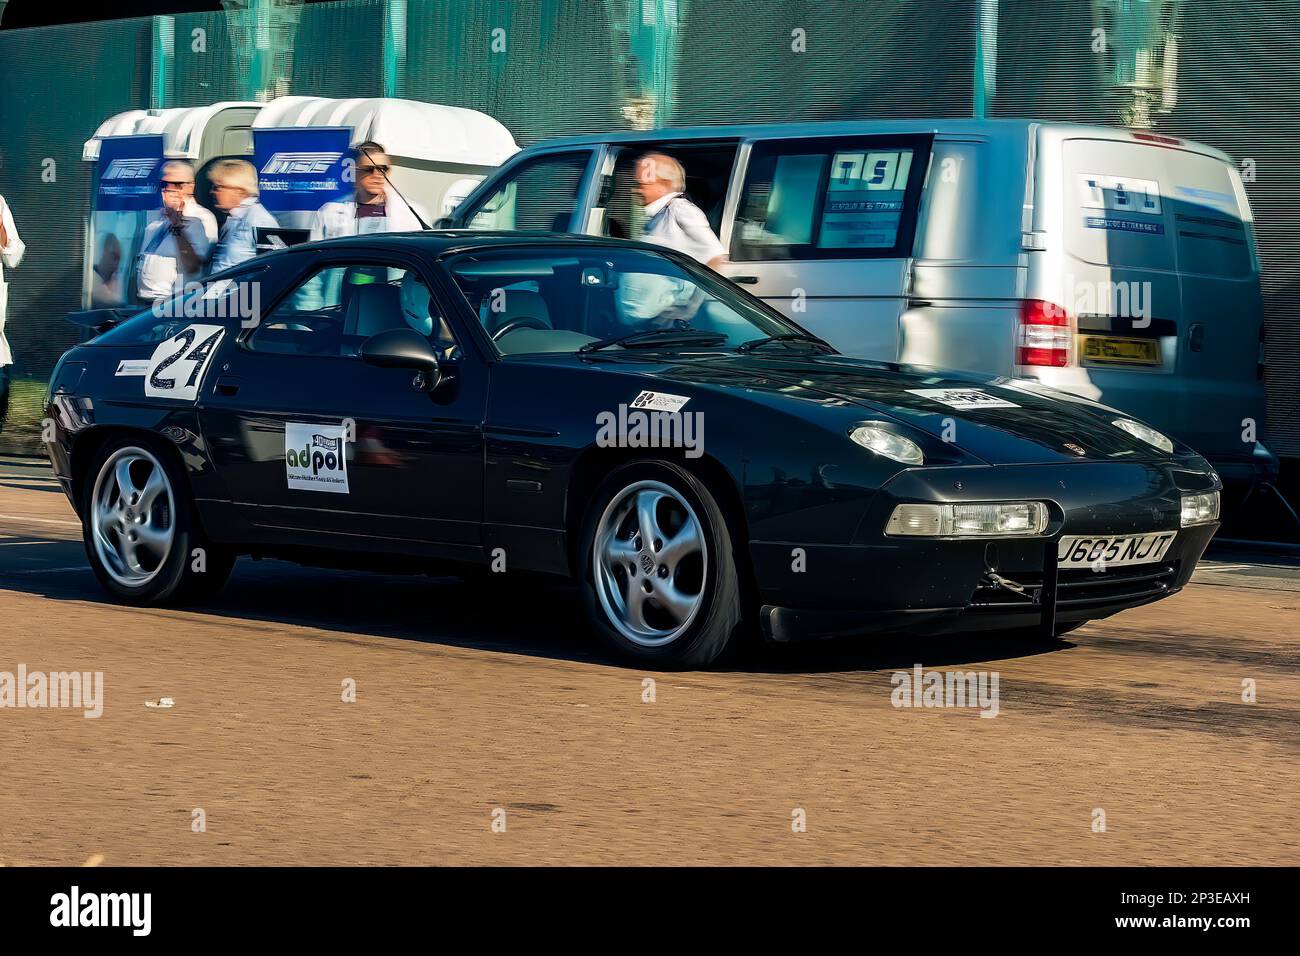 Joe Field driving a Porsche 928 GT at The Brighton National Speed Trials 2017. This is the oldest motor racing event in the UK and is held in the south east coastal town of Brighton. Madeira drive is a road which runs along the seafront and is normal full of people explorer the beach, pier and local attractions. Today it is turned in to a 1/4 time trial course. 2nd September 2017 Stock Photo